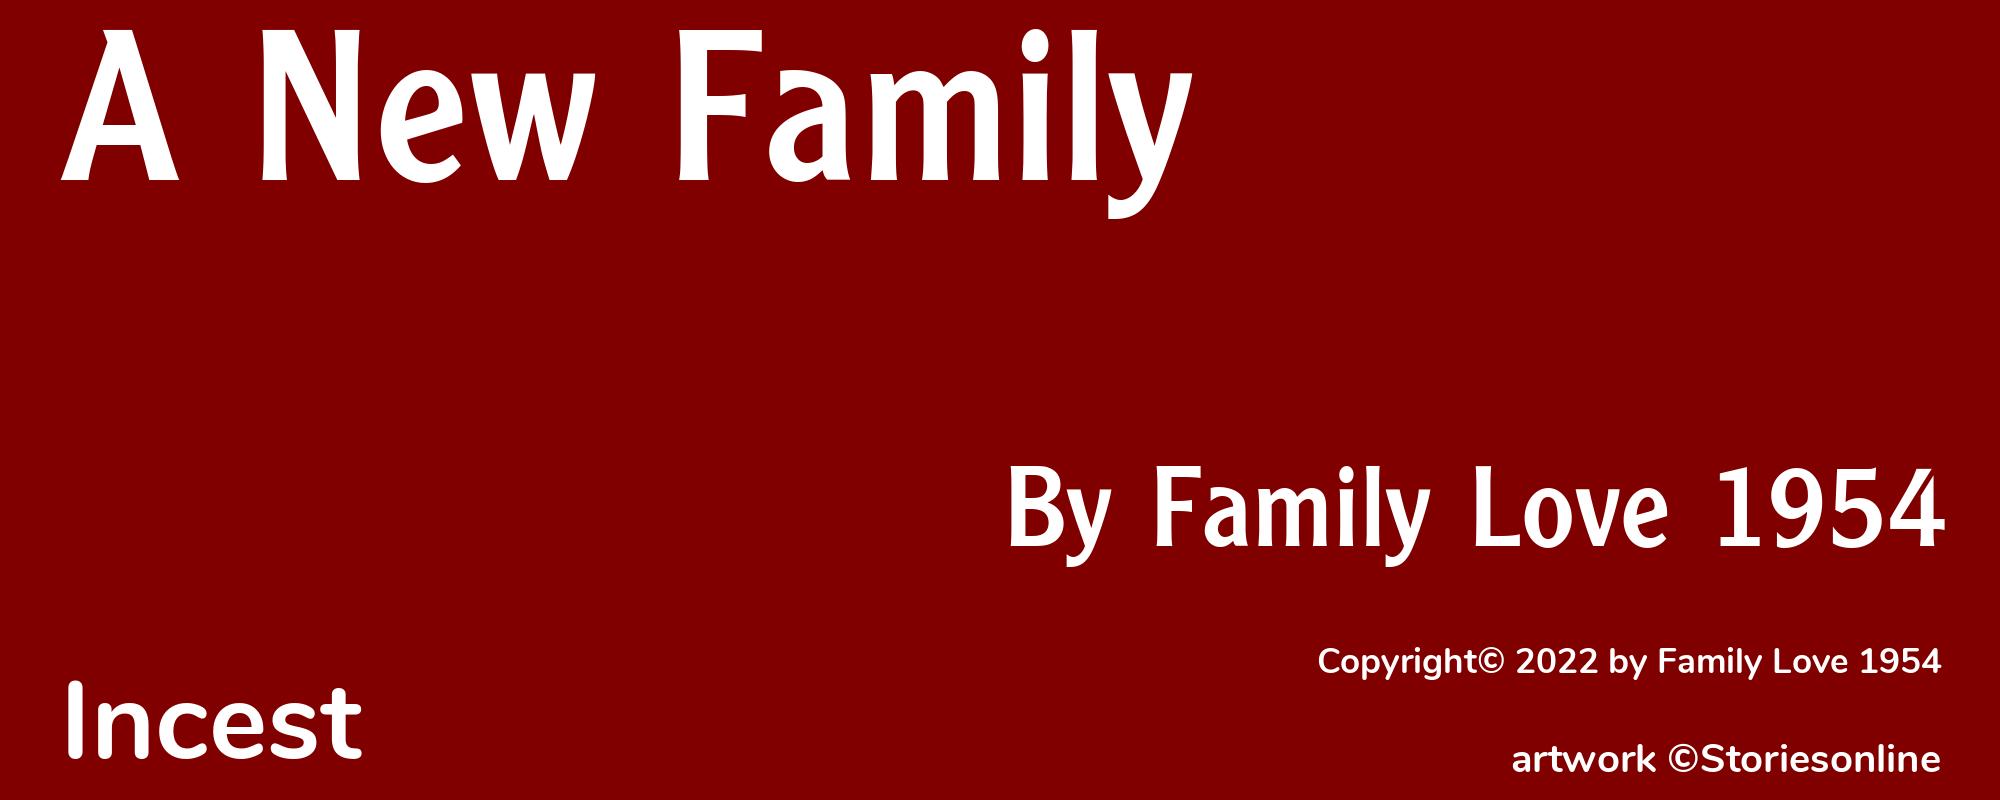 A New Family - Cover